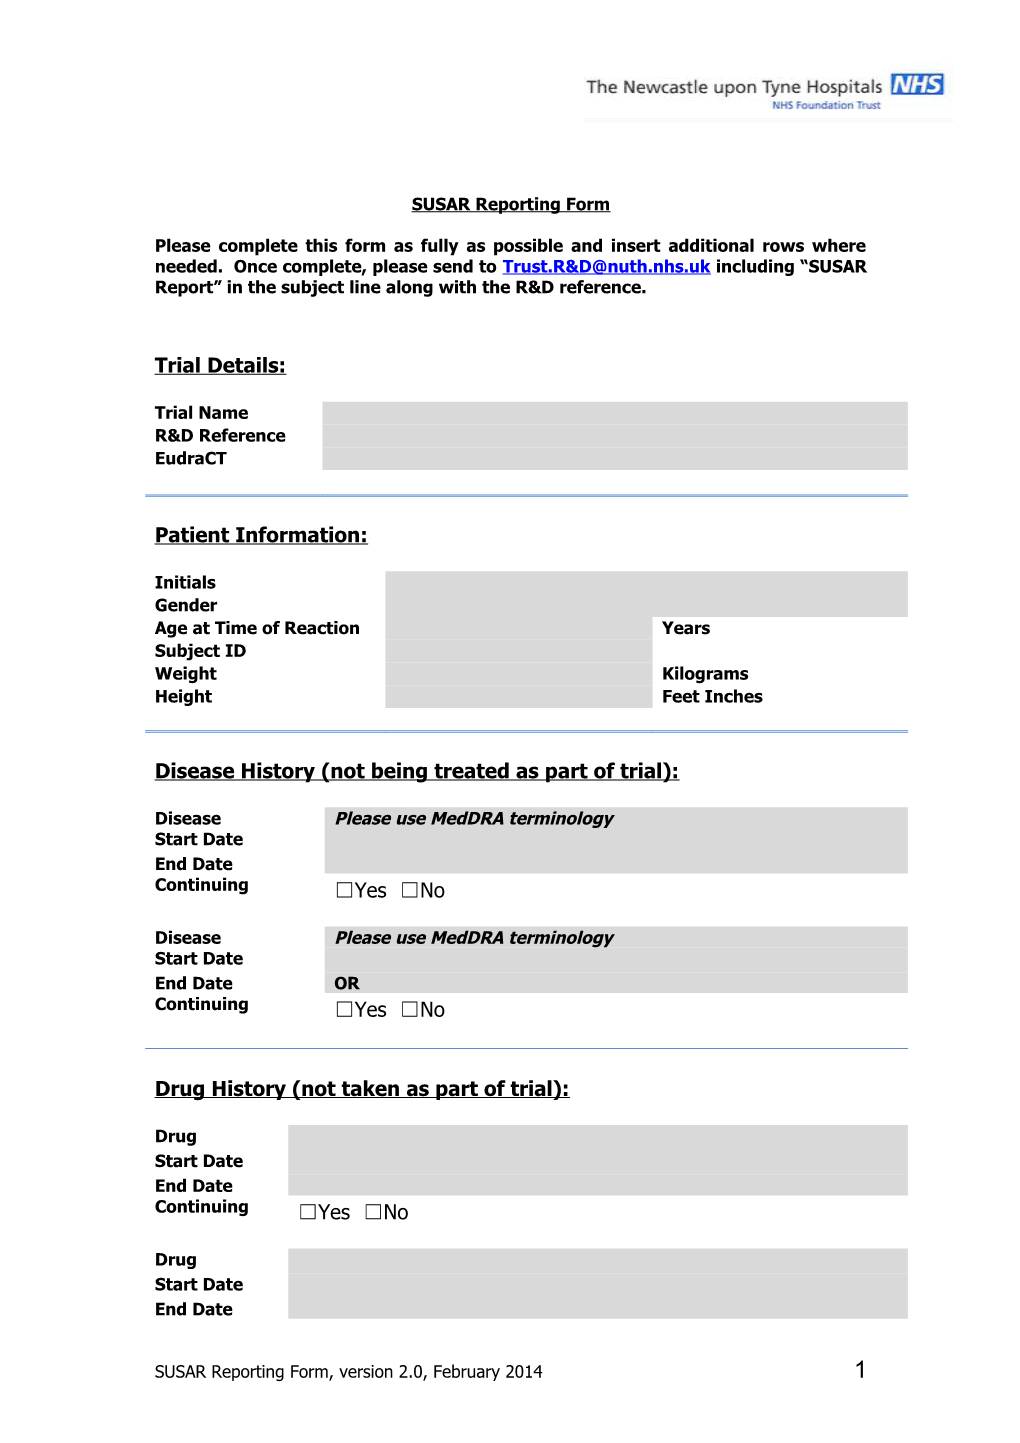 SUSAR Reporting Form, Version 2.0, February 20141